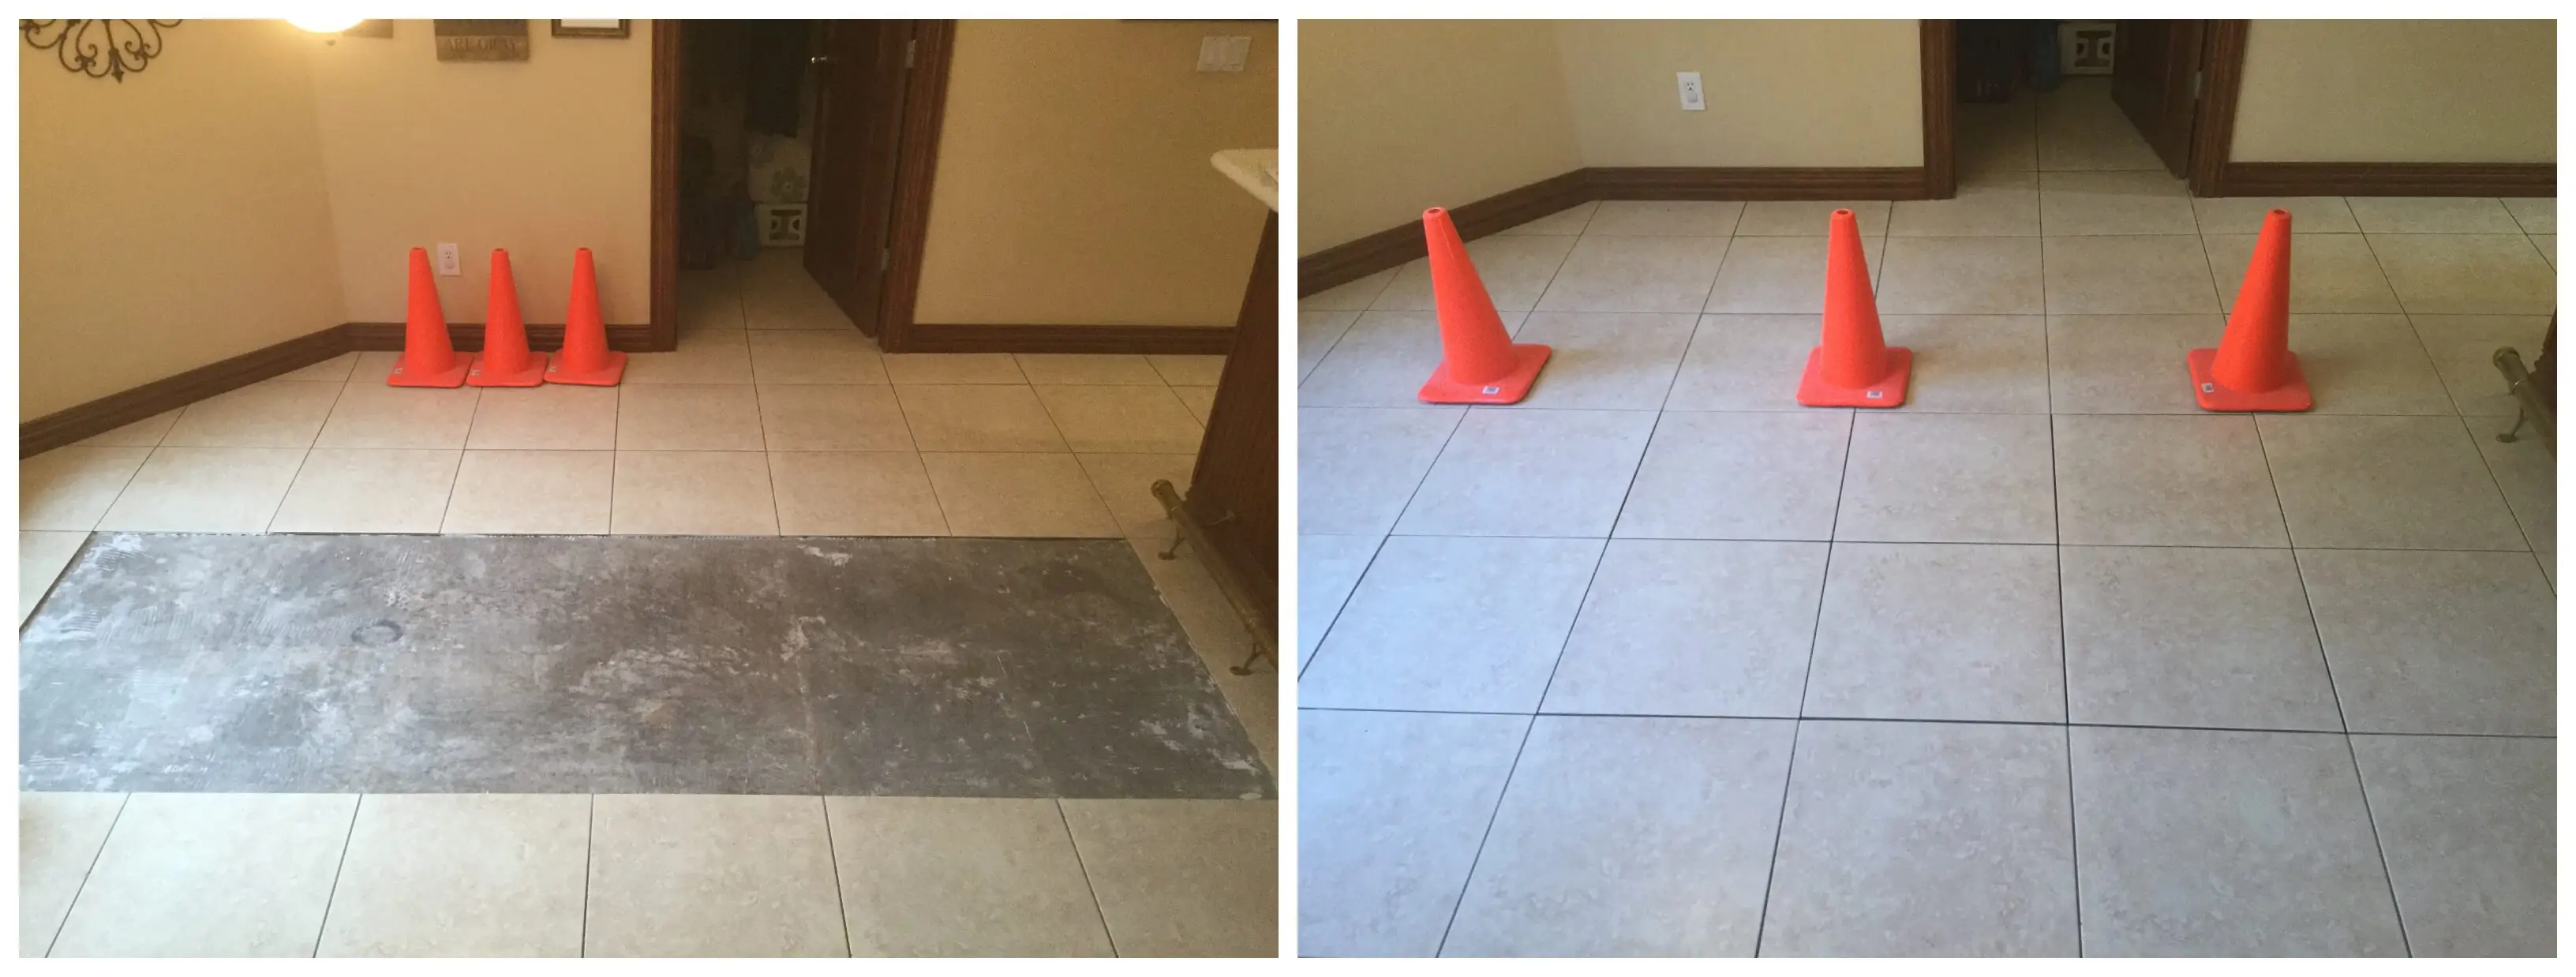 A tile floor with missing pieces, and the new pieces installed for tile repair by Mr. Handyman.